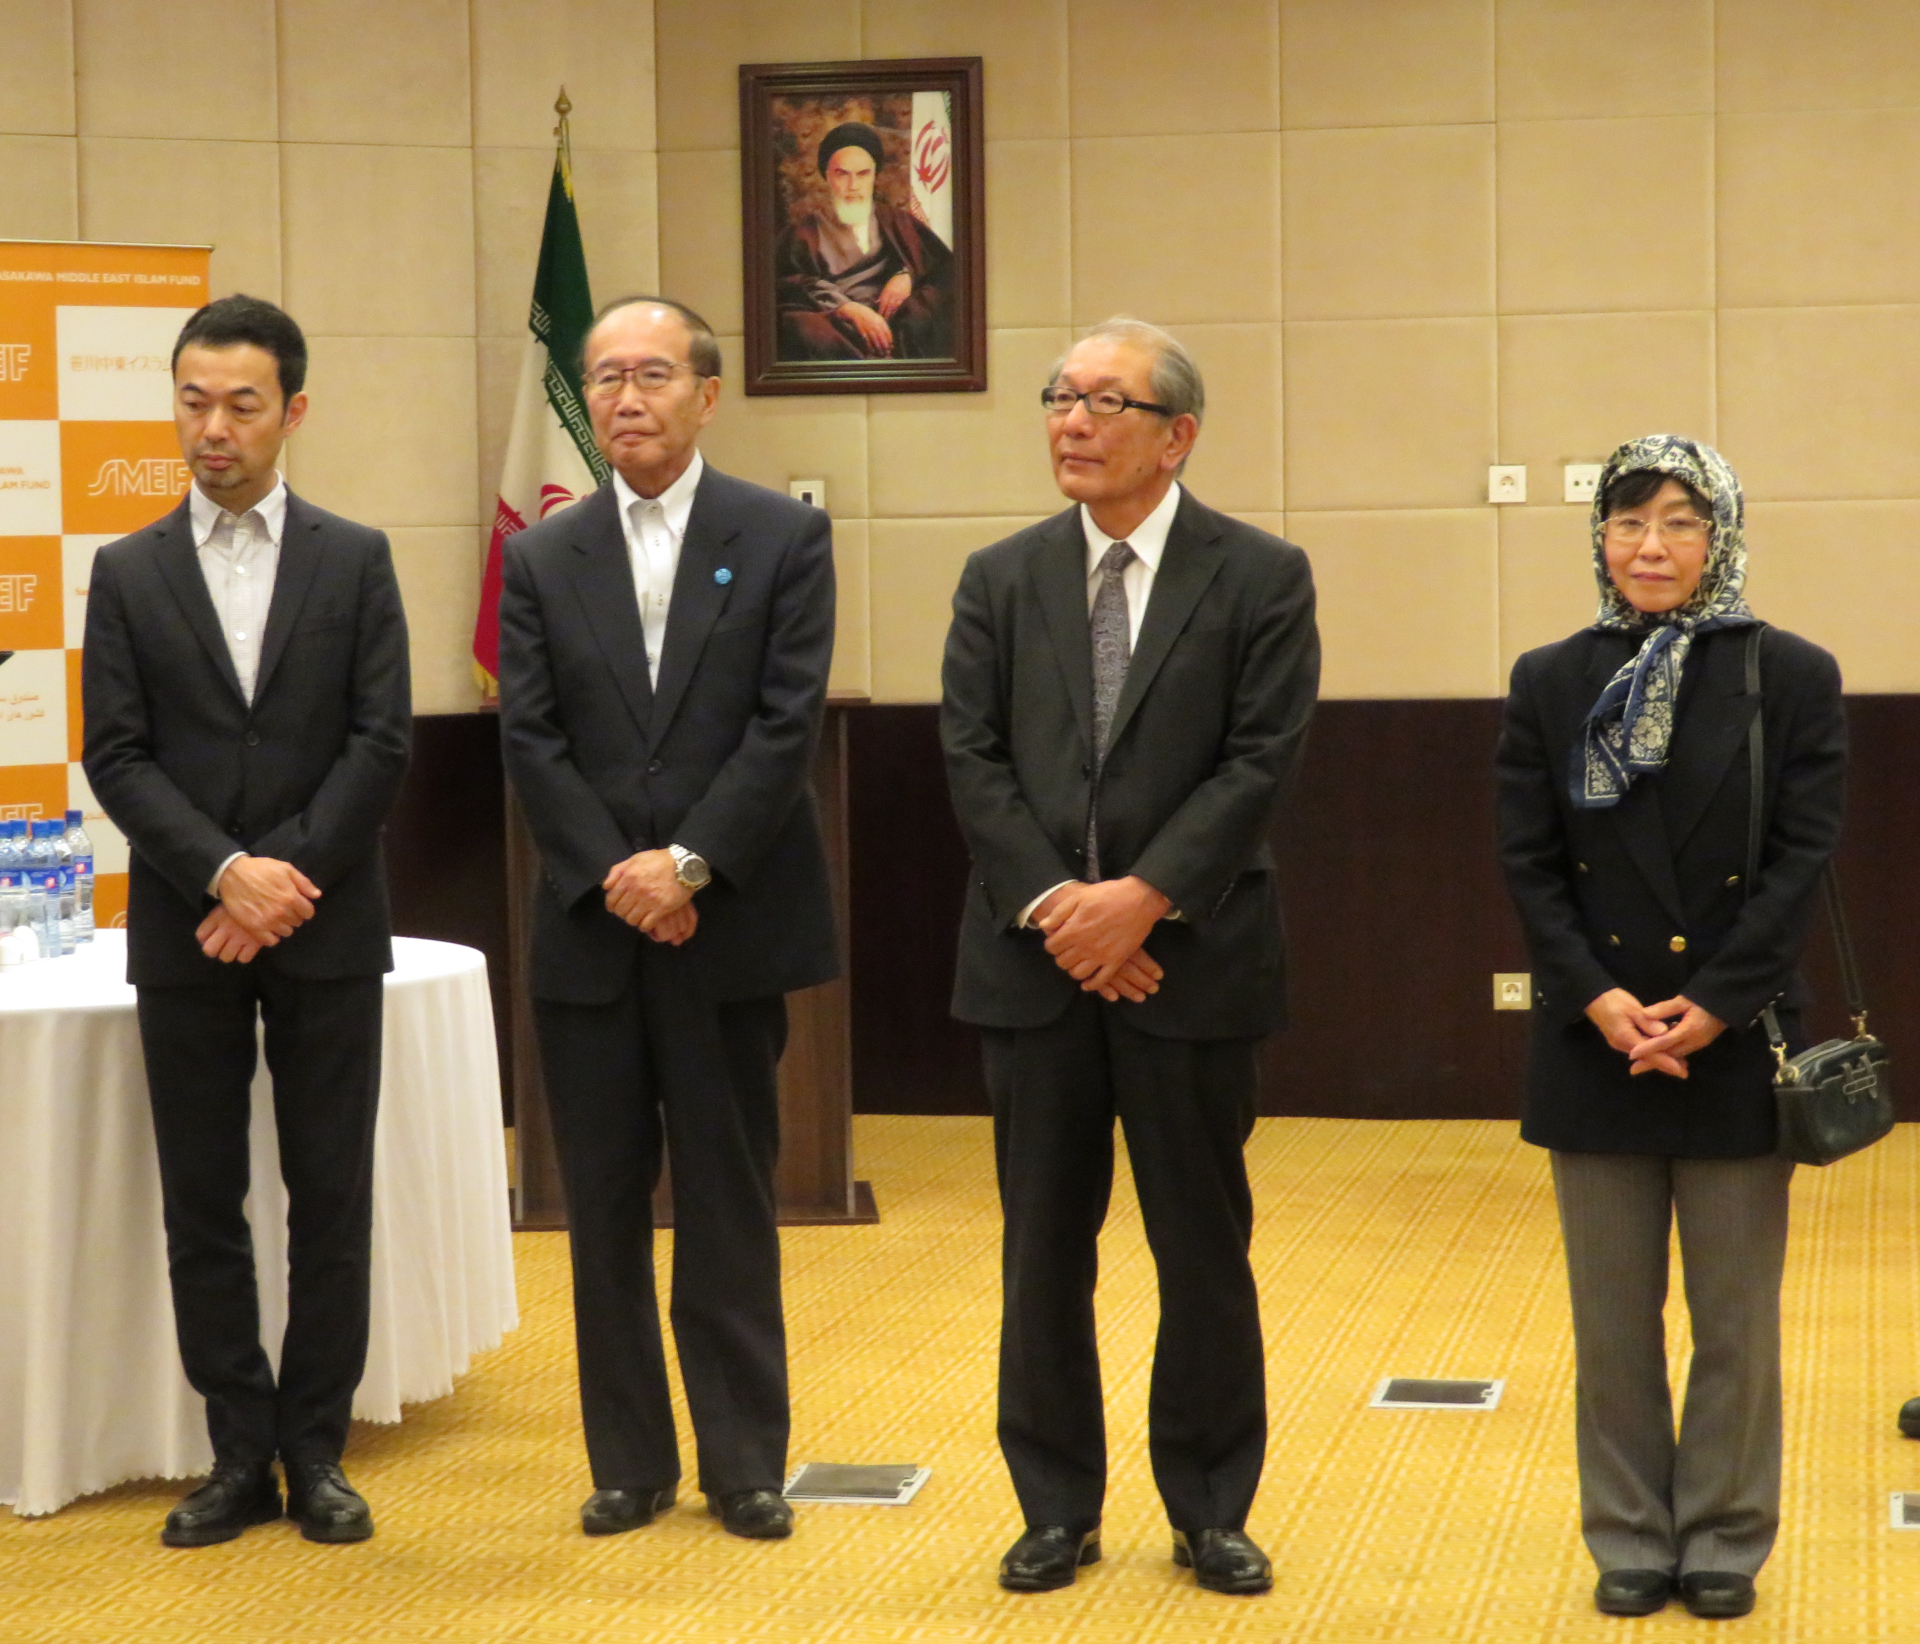 Interview with panelists at the Japan-Iran symposium in Tehran